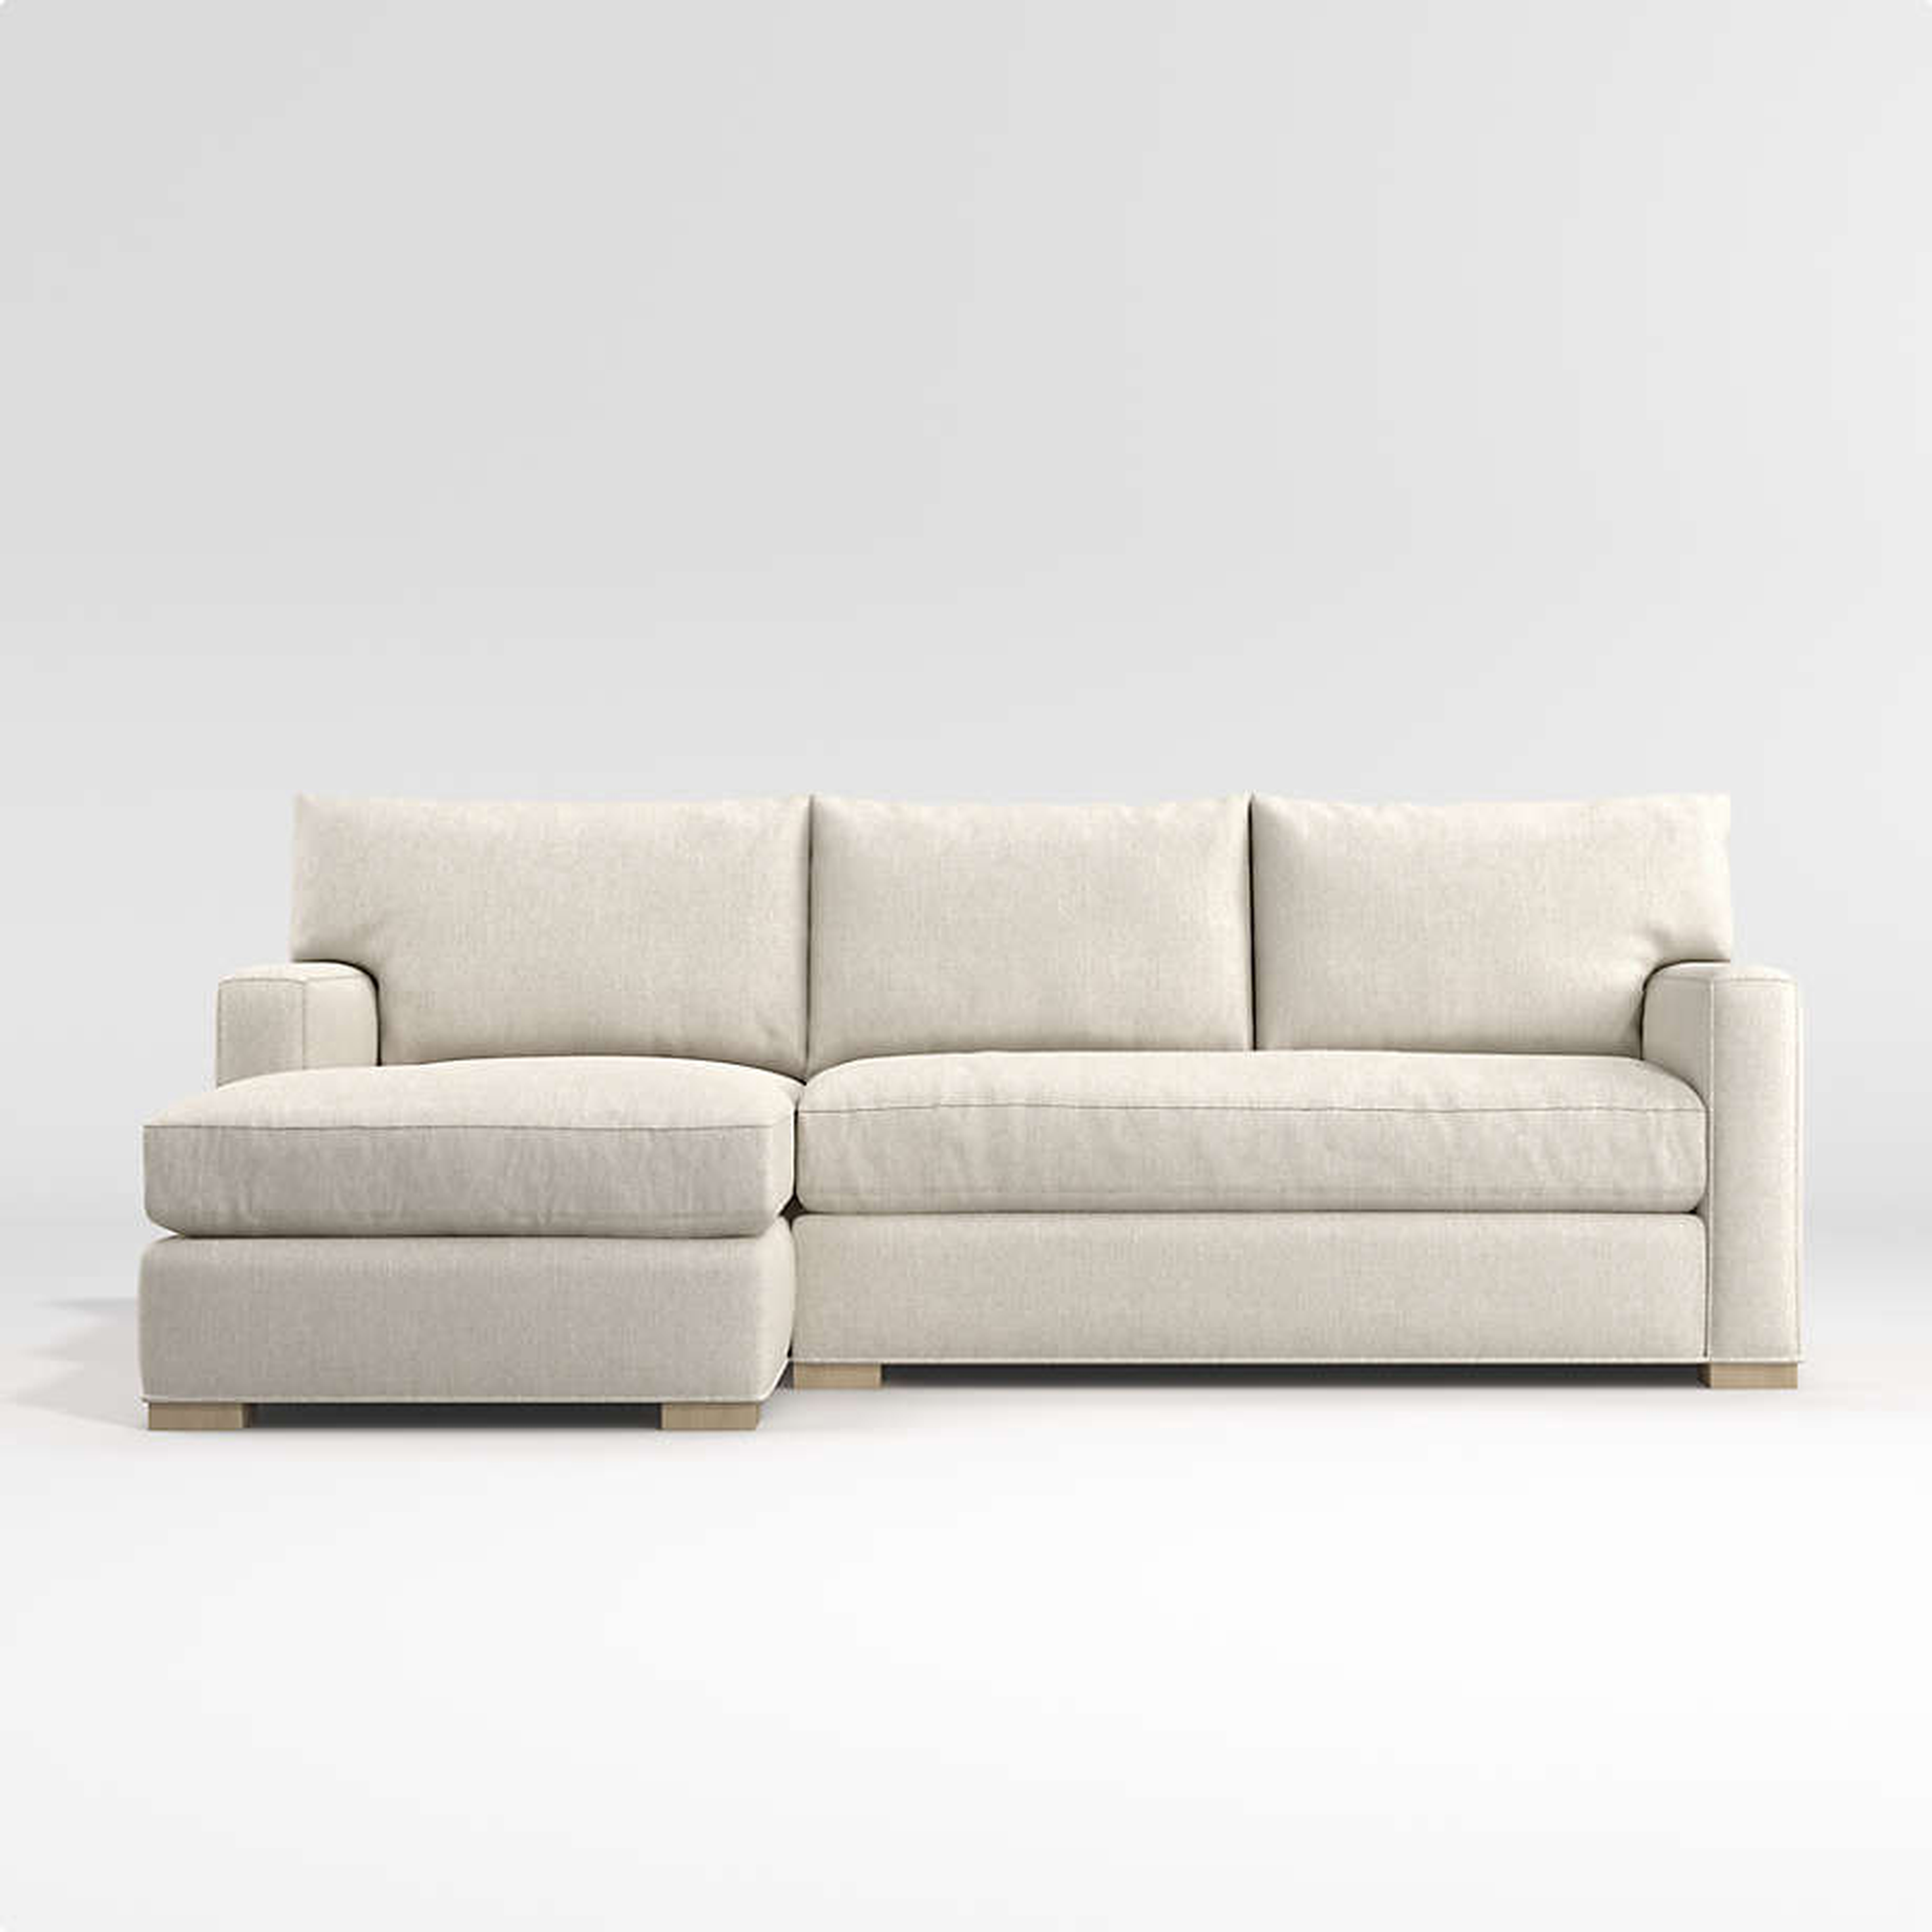 Axis Bench 2-Piece Sectional Sofa - Crate and Barrel